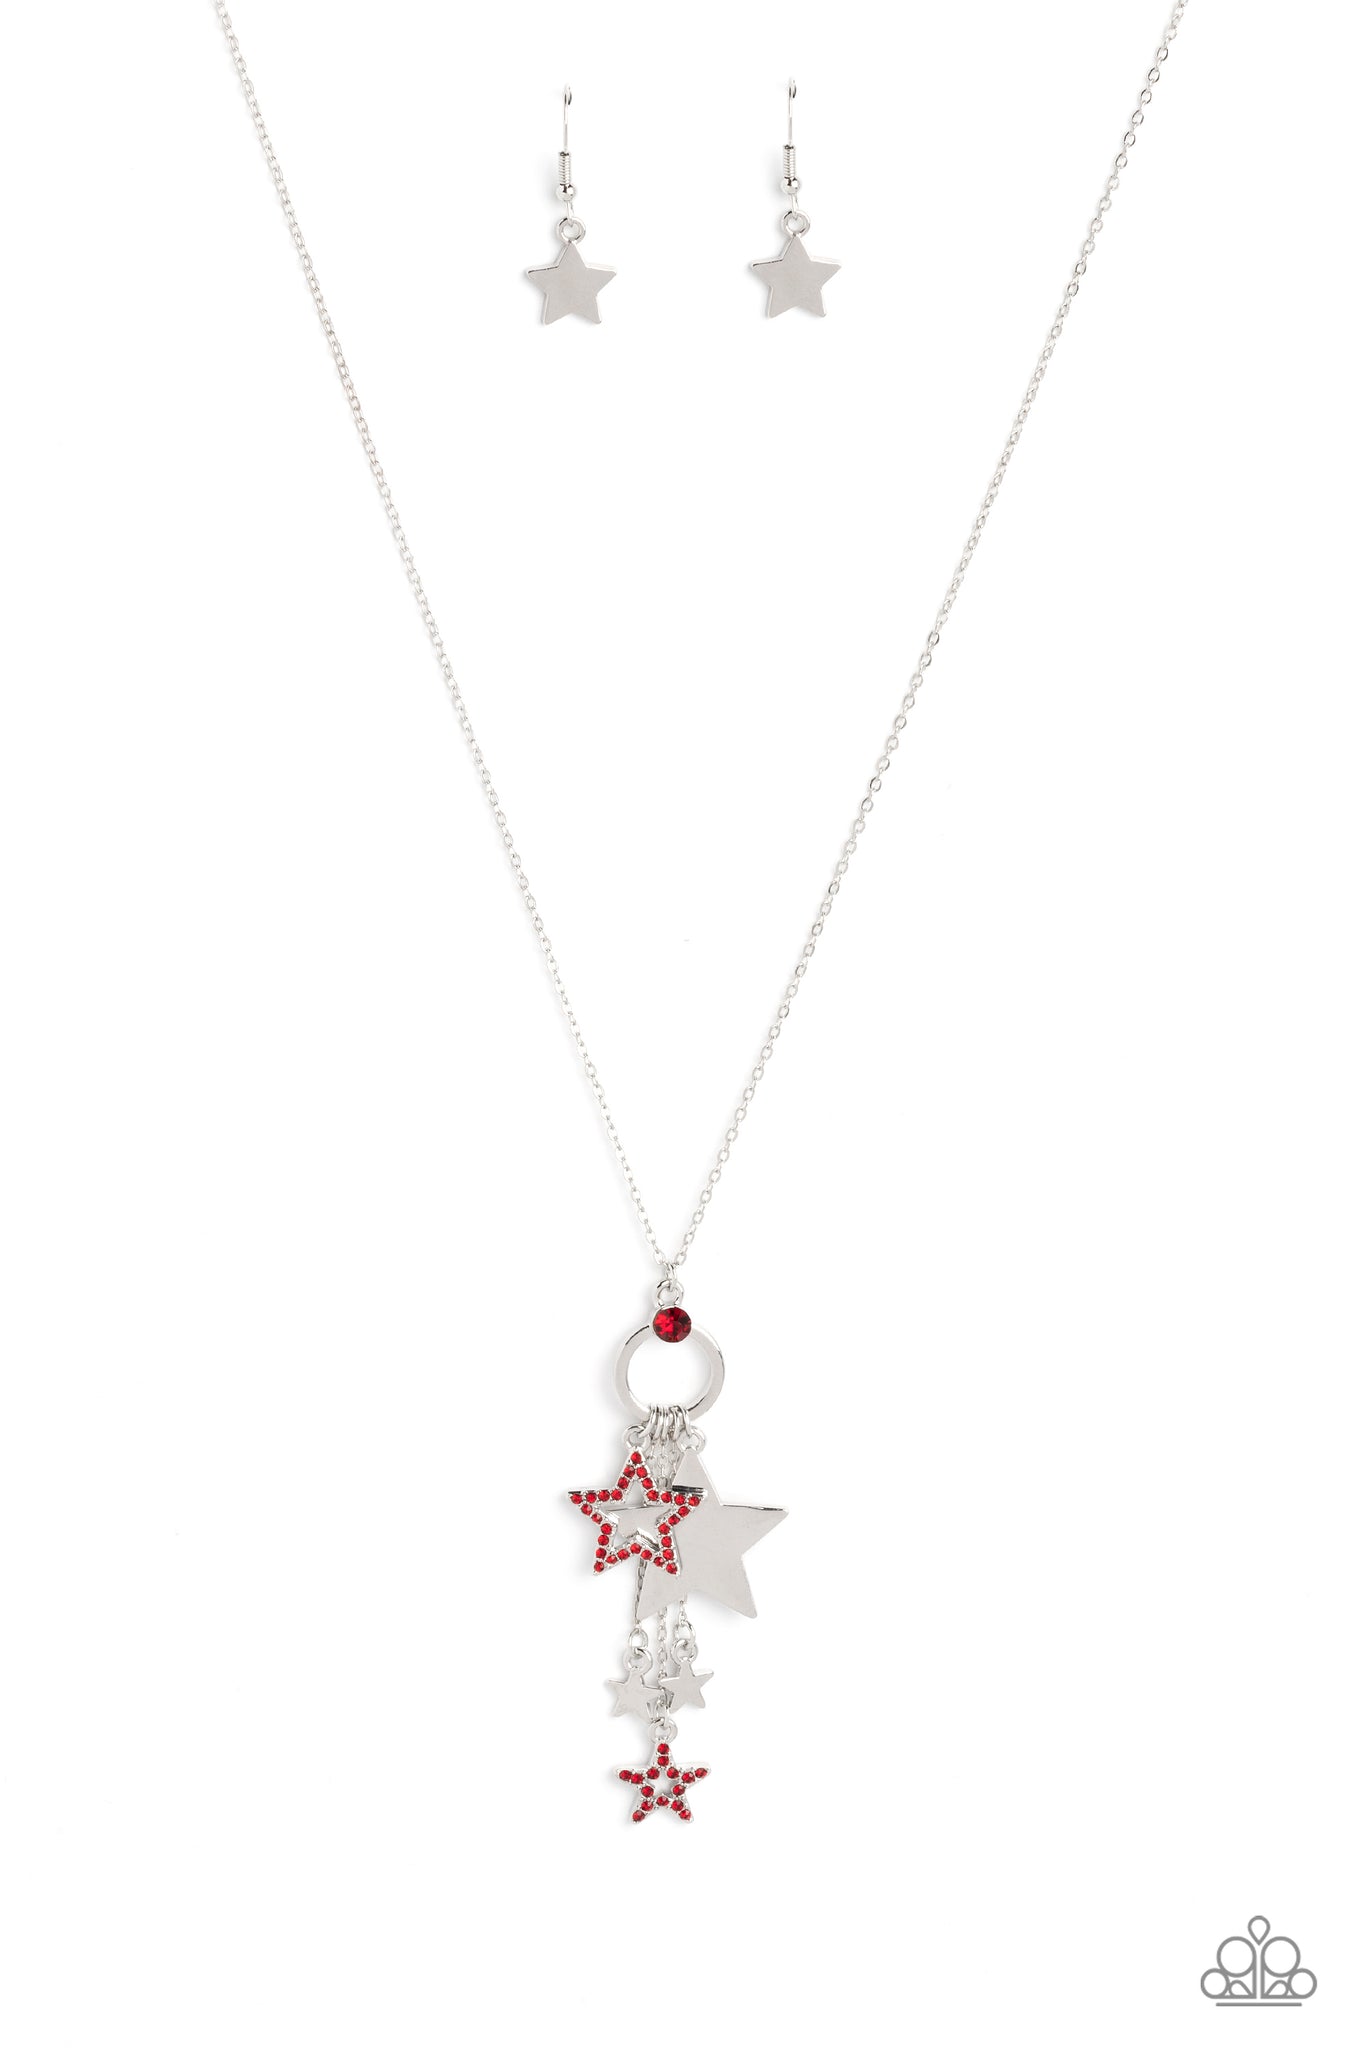 Starry Statutes Necklace (Red, Blue)